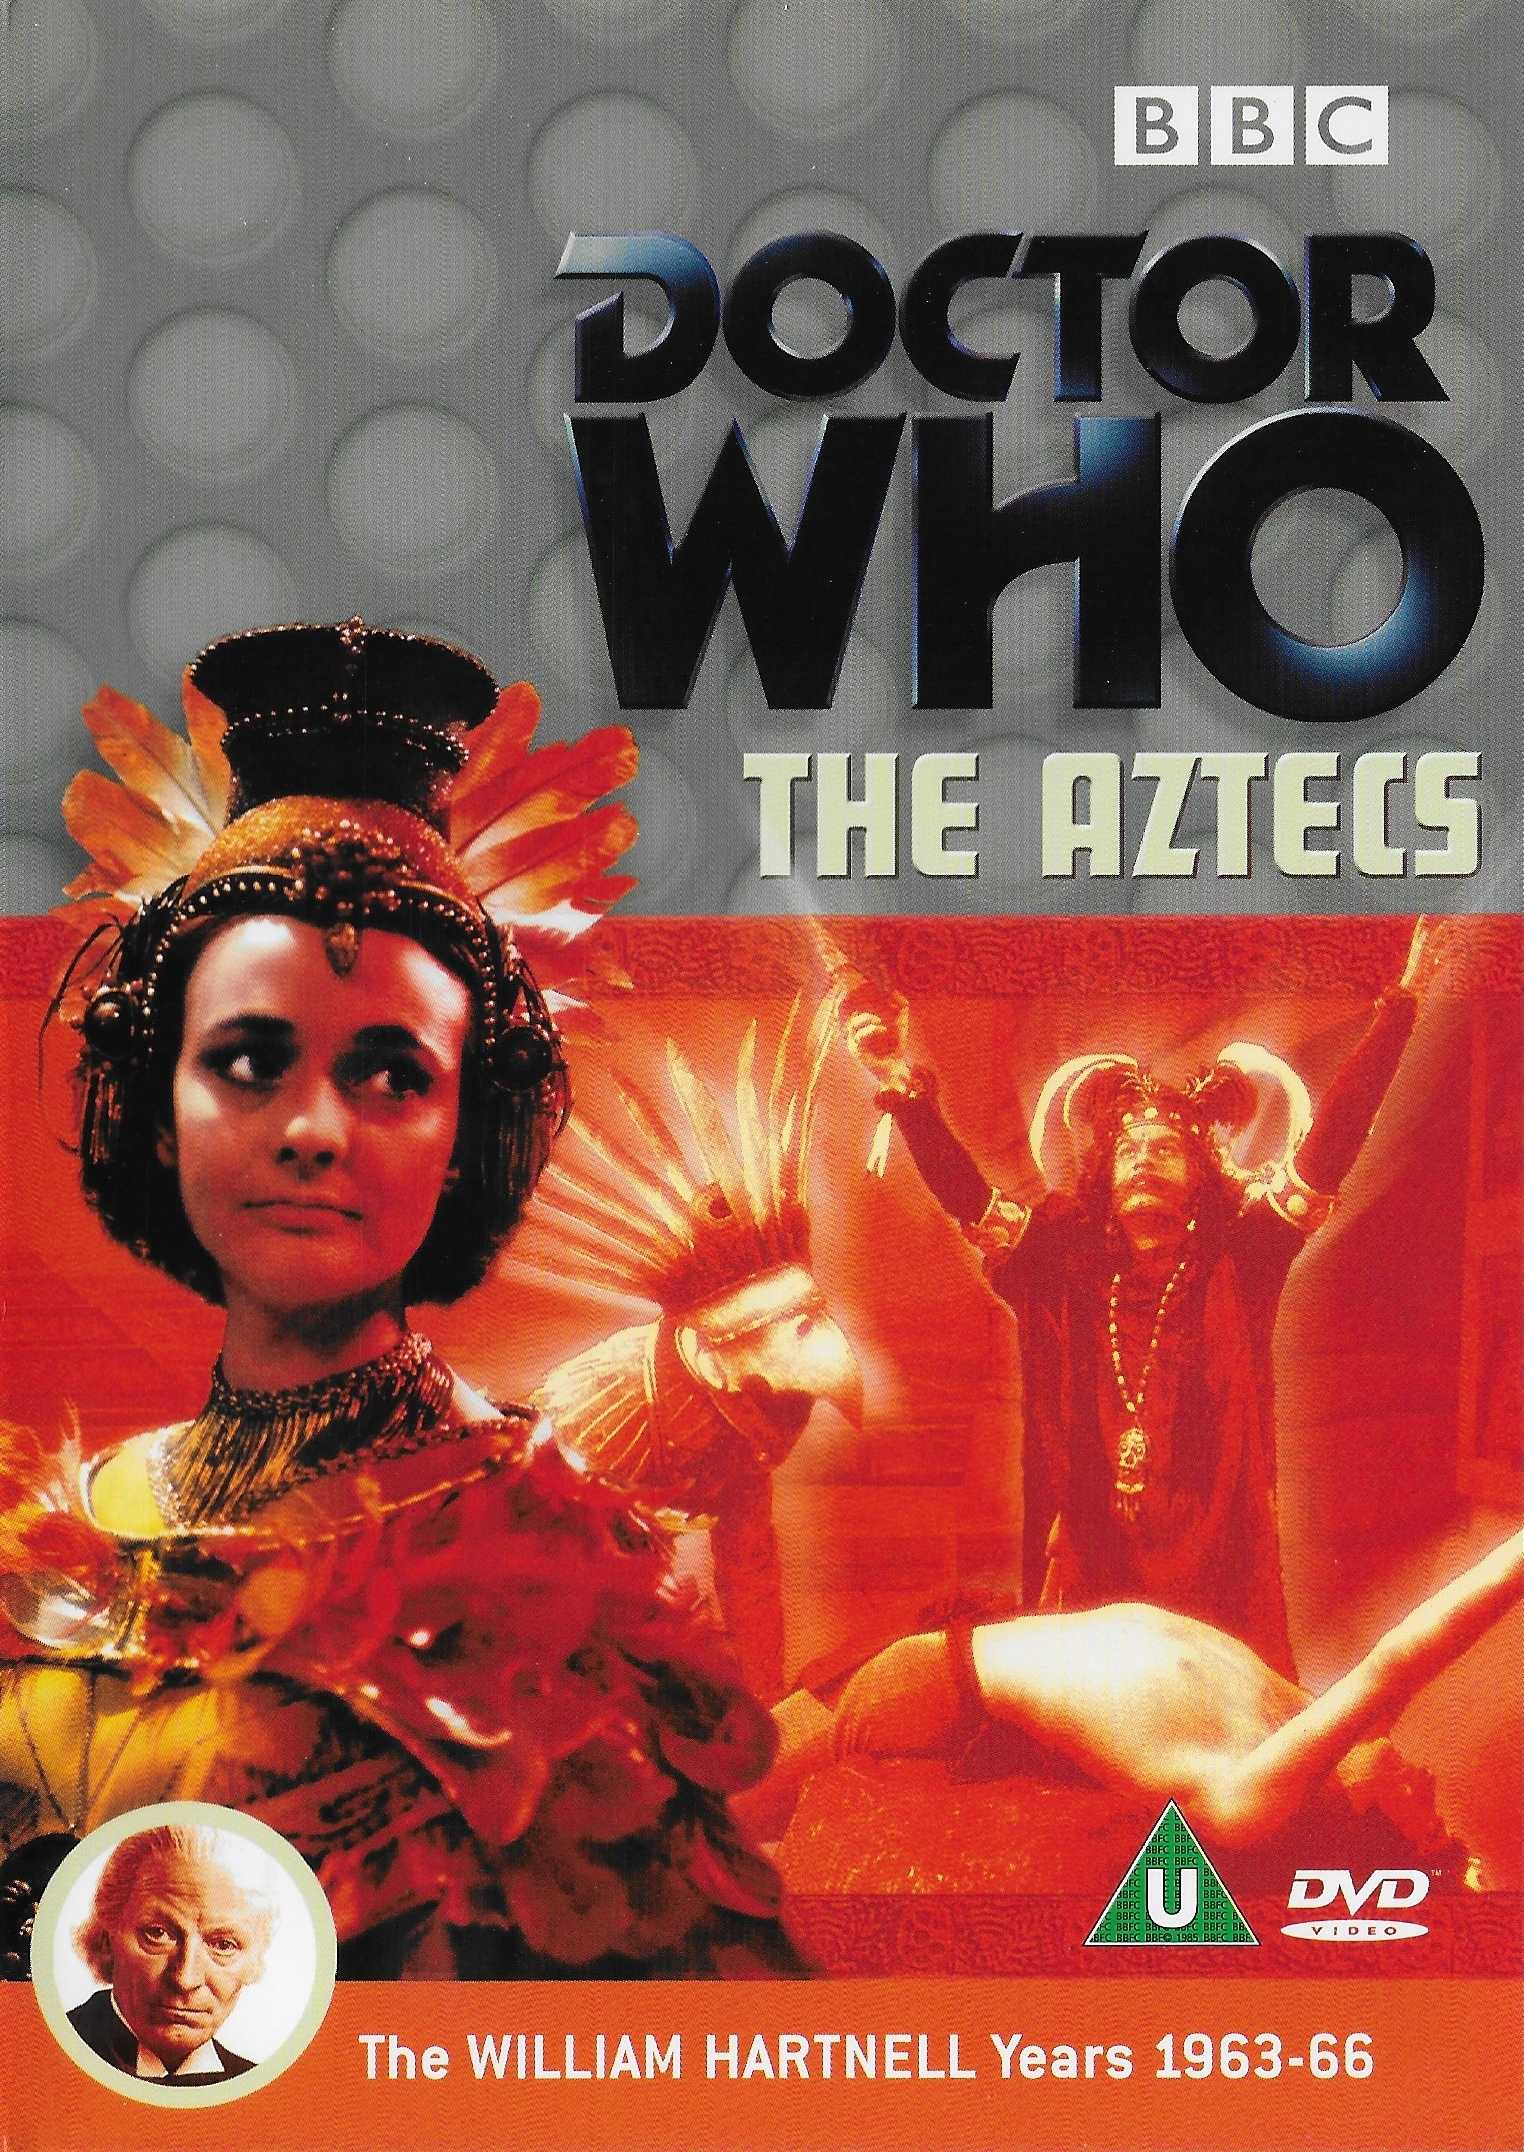 Front cover of BBCDVD 1099